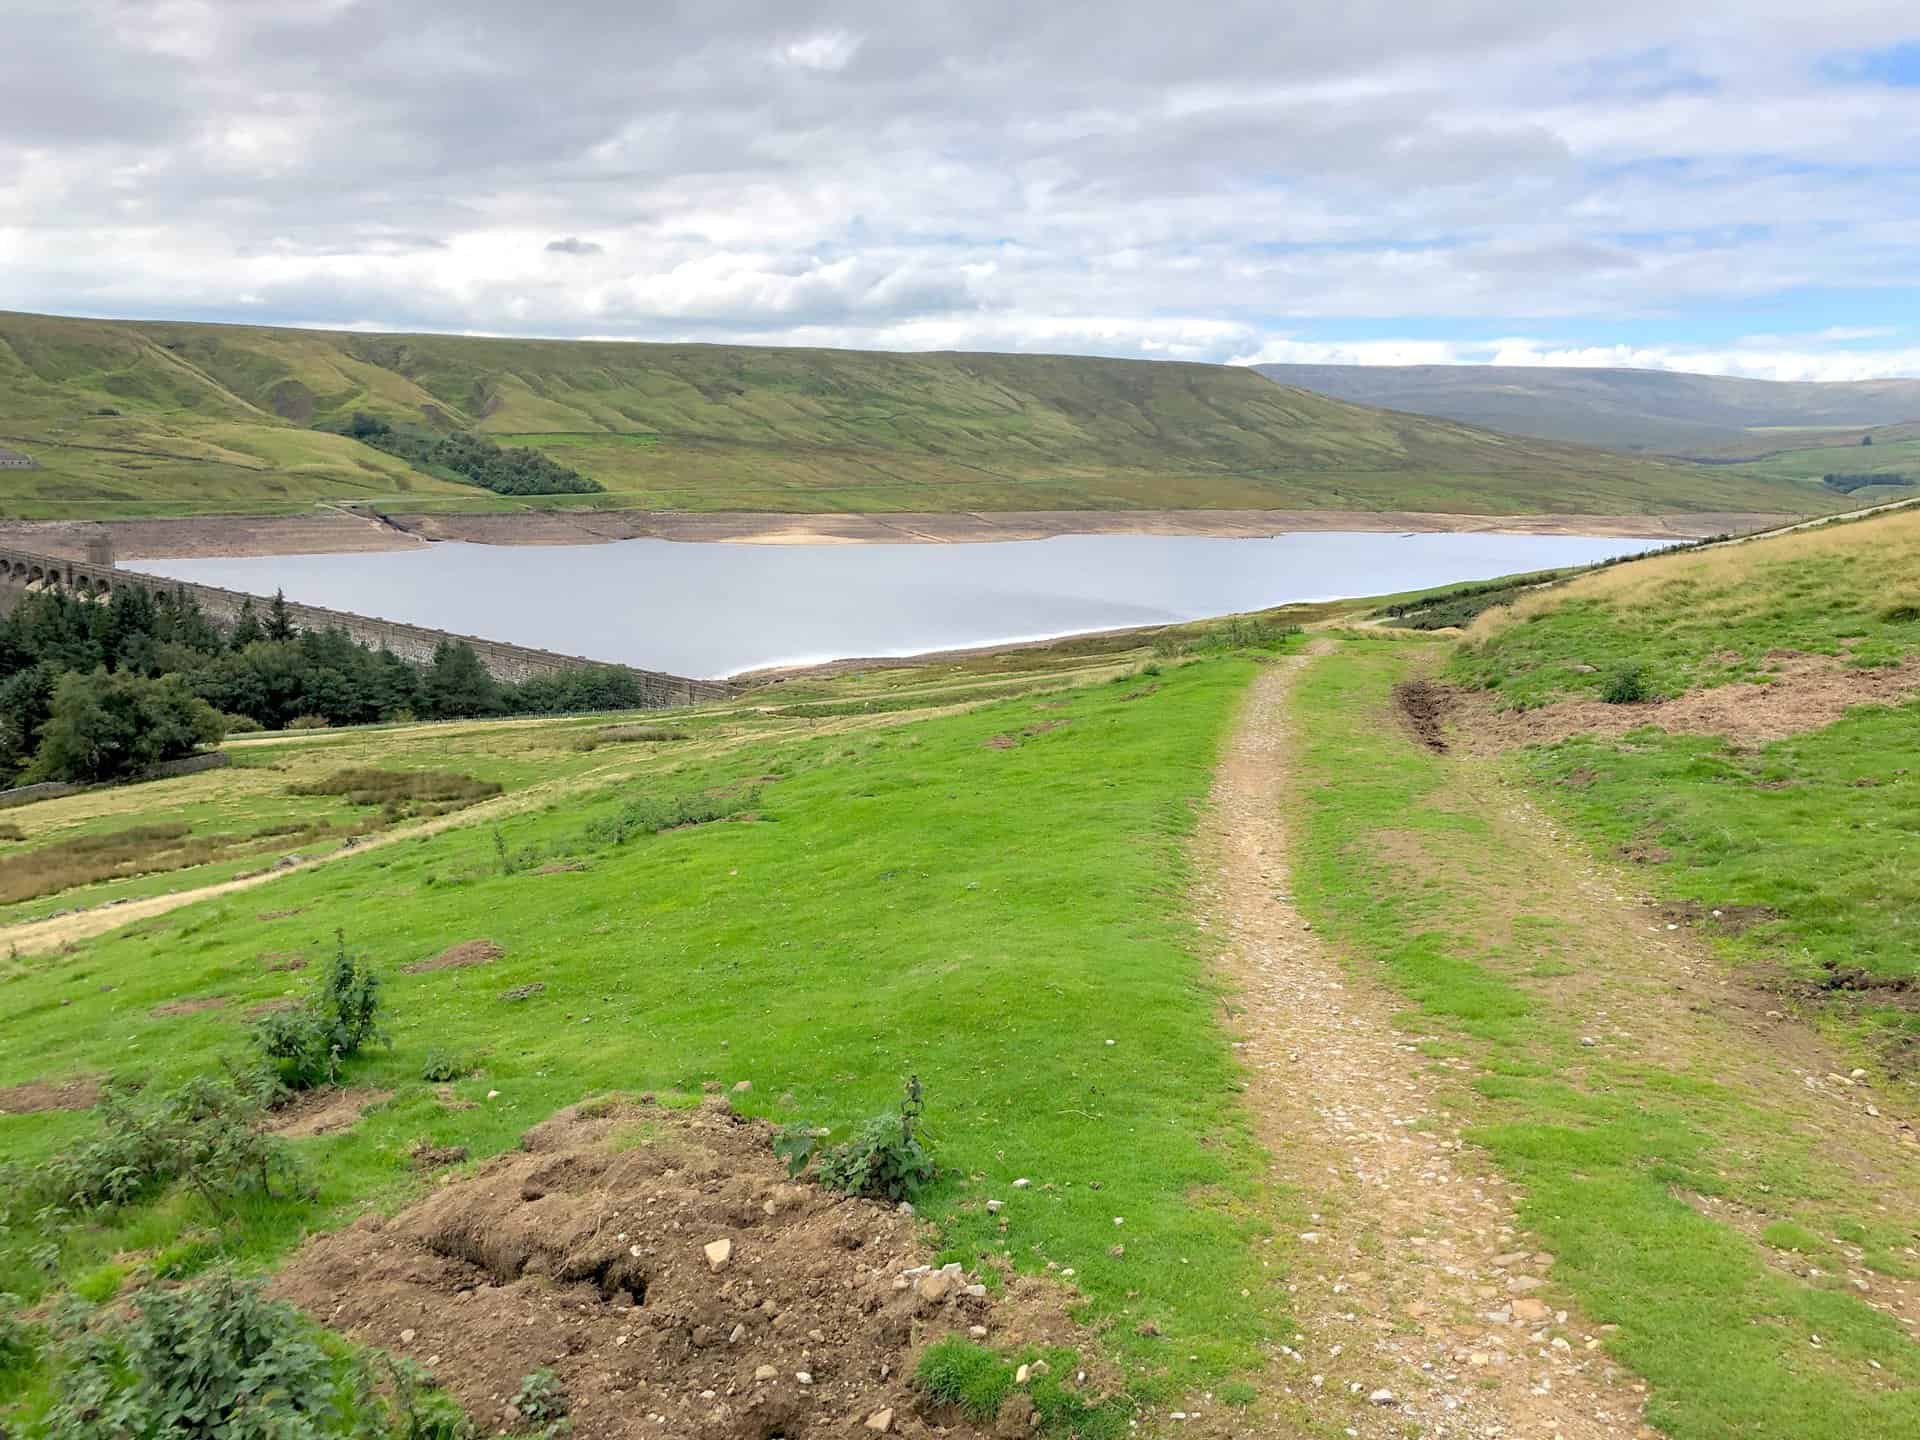 The dam contains over one million tonnes of masonry, rises to 55 metres above the river and is almost 600 metres long. It was completed in 1936. The reservoir is fed almost exclusively from Angram reservoir, which in turn is fed predominantly from the flanks of Great Whernside.